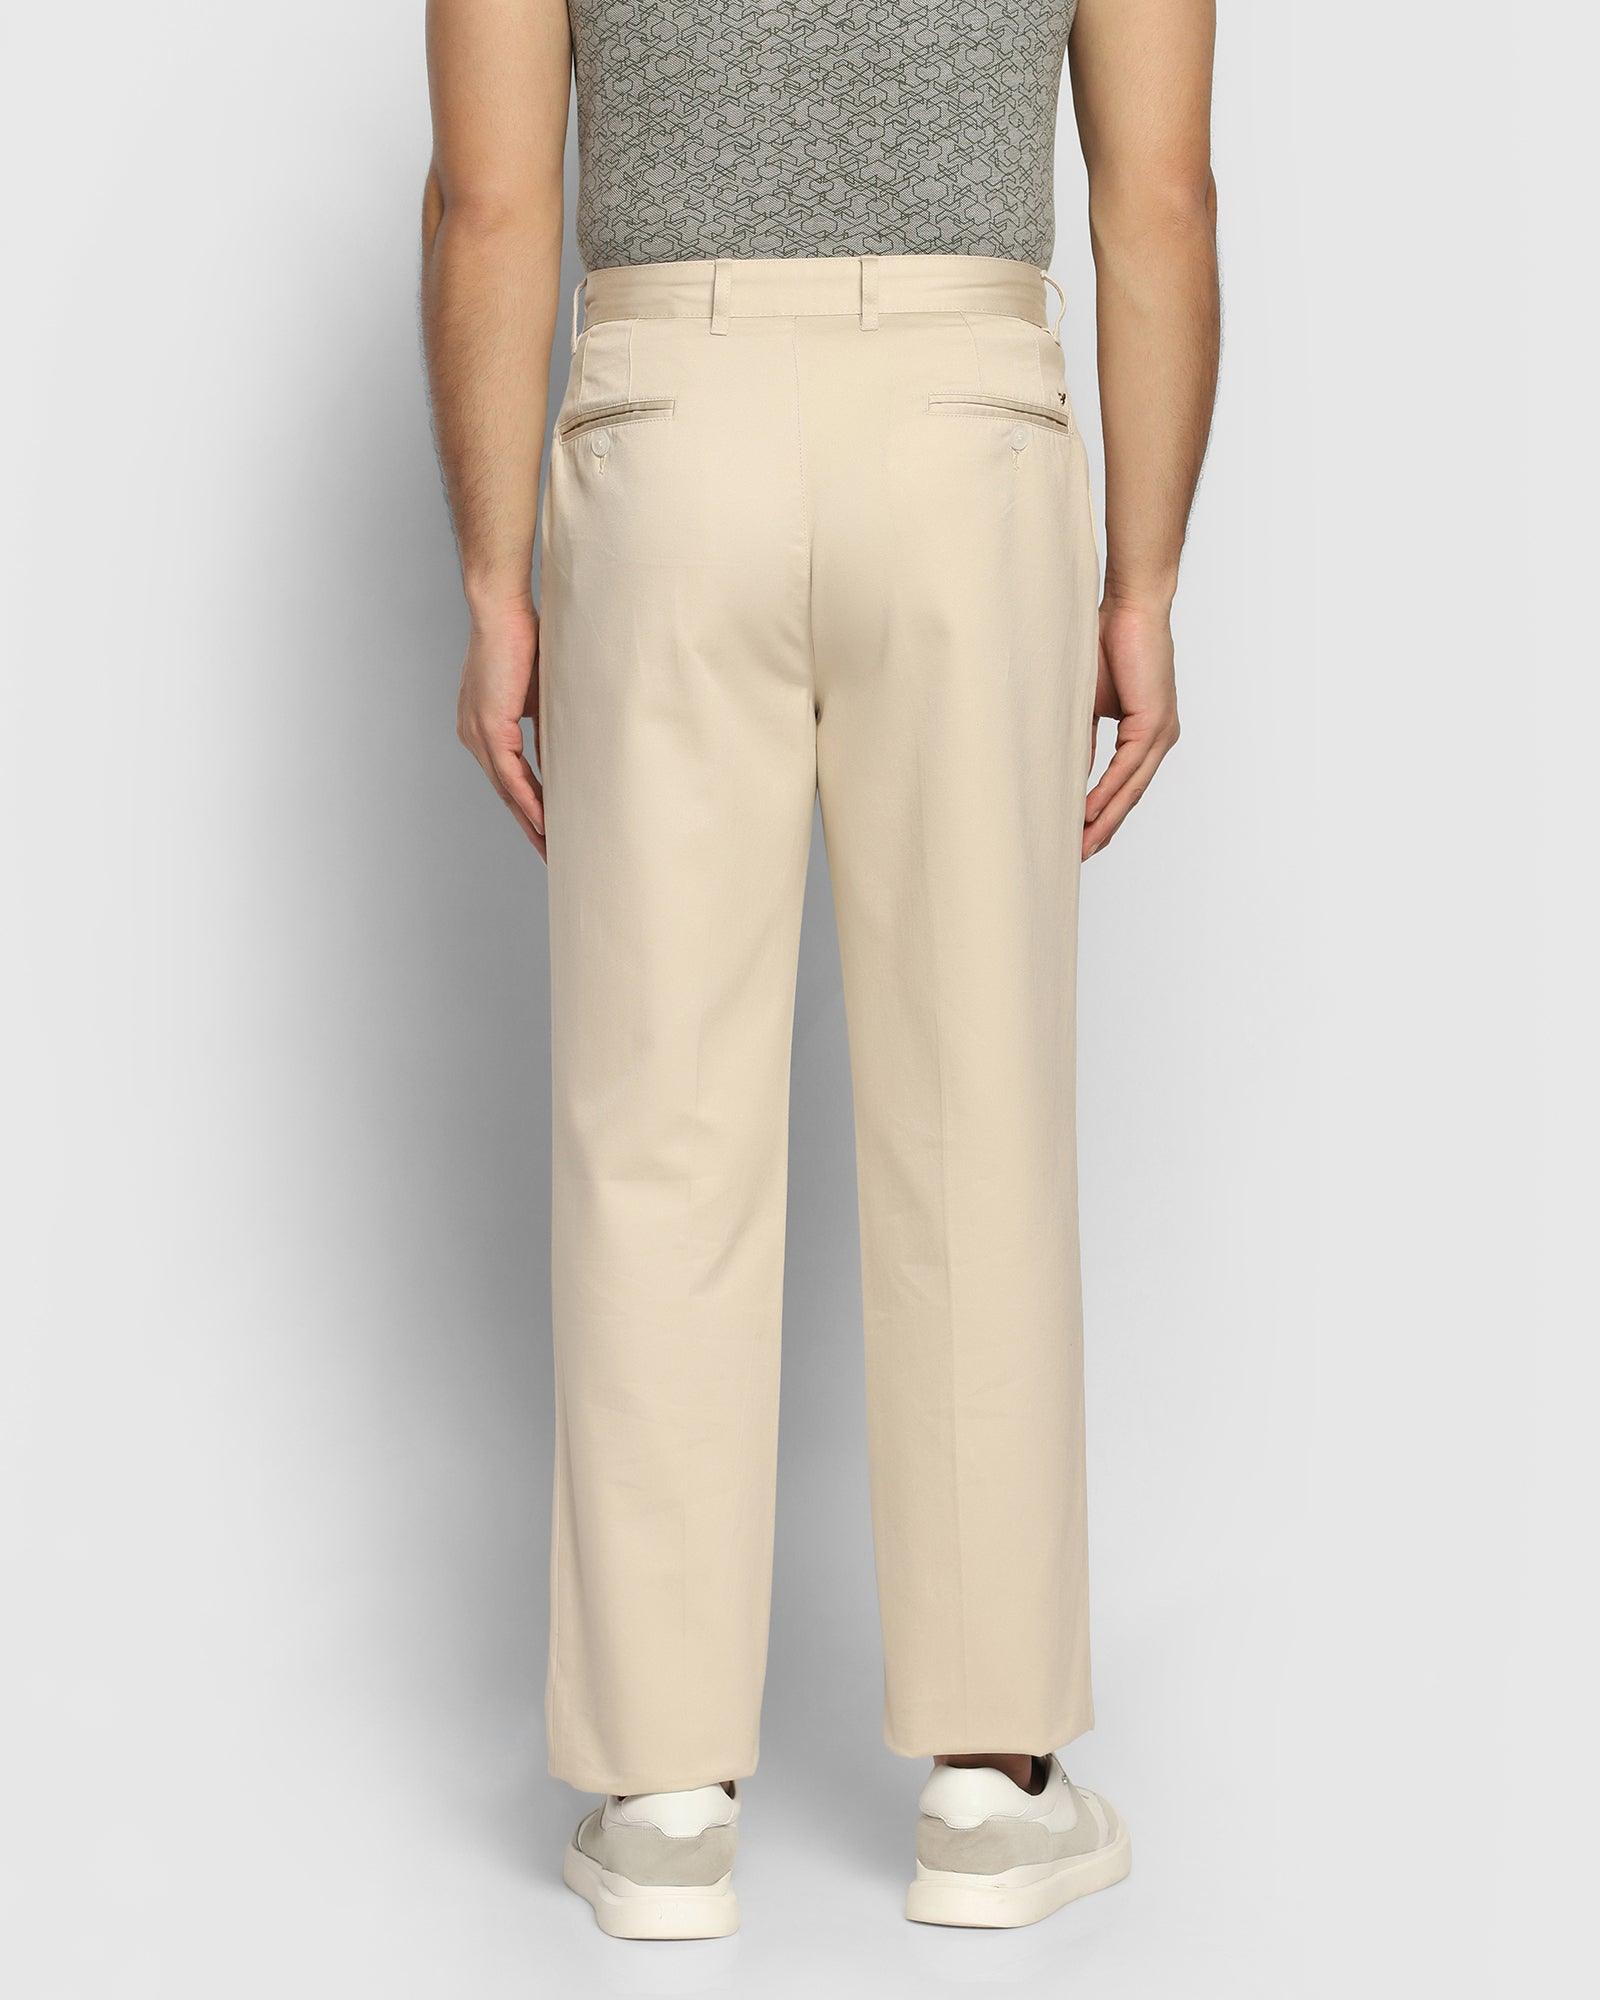 Straight Comfort B-88P Casual Beige Solid Khakis - Knight Rider